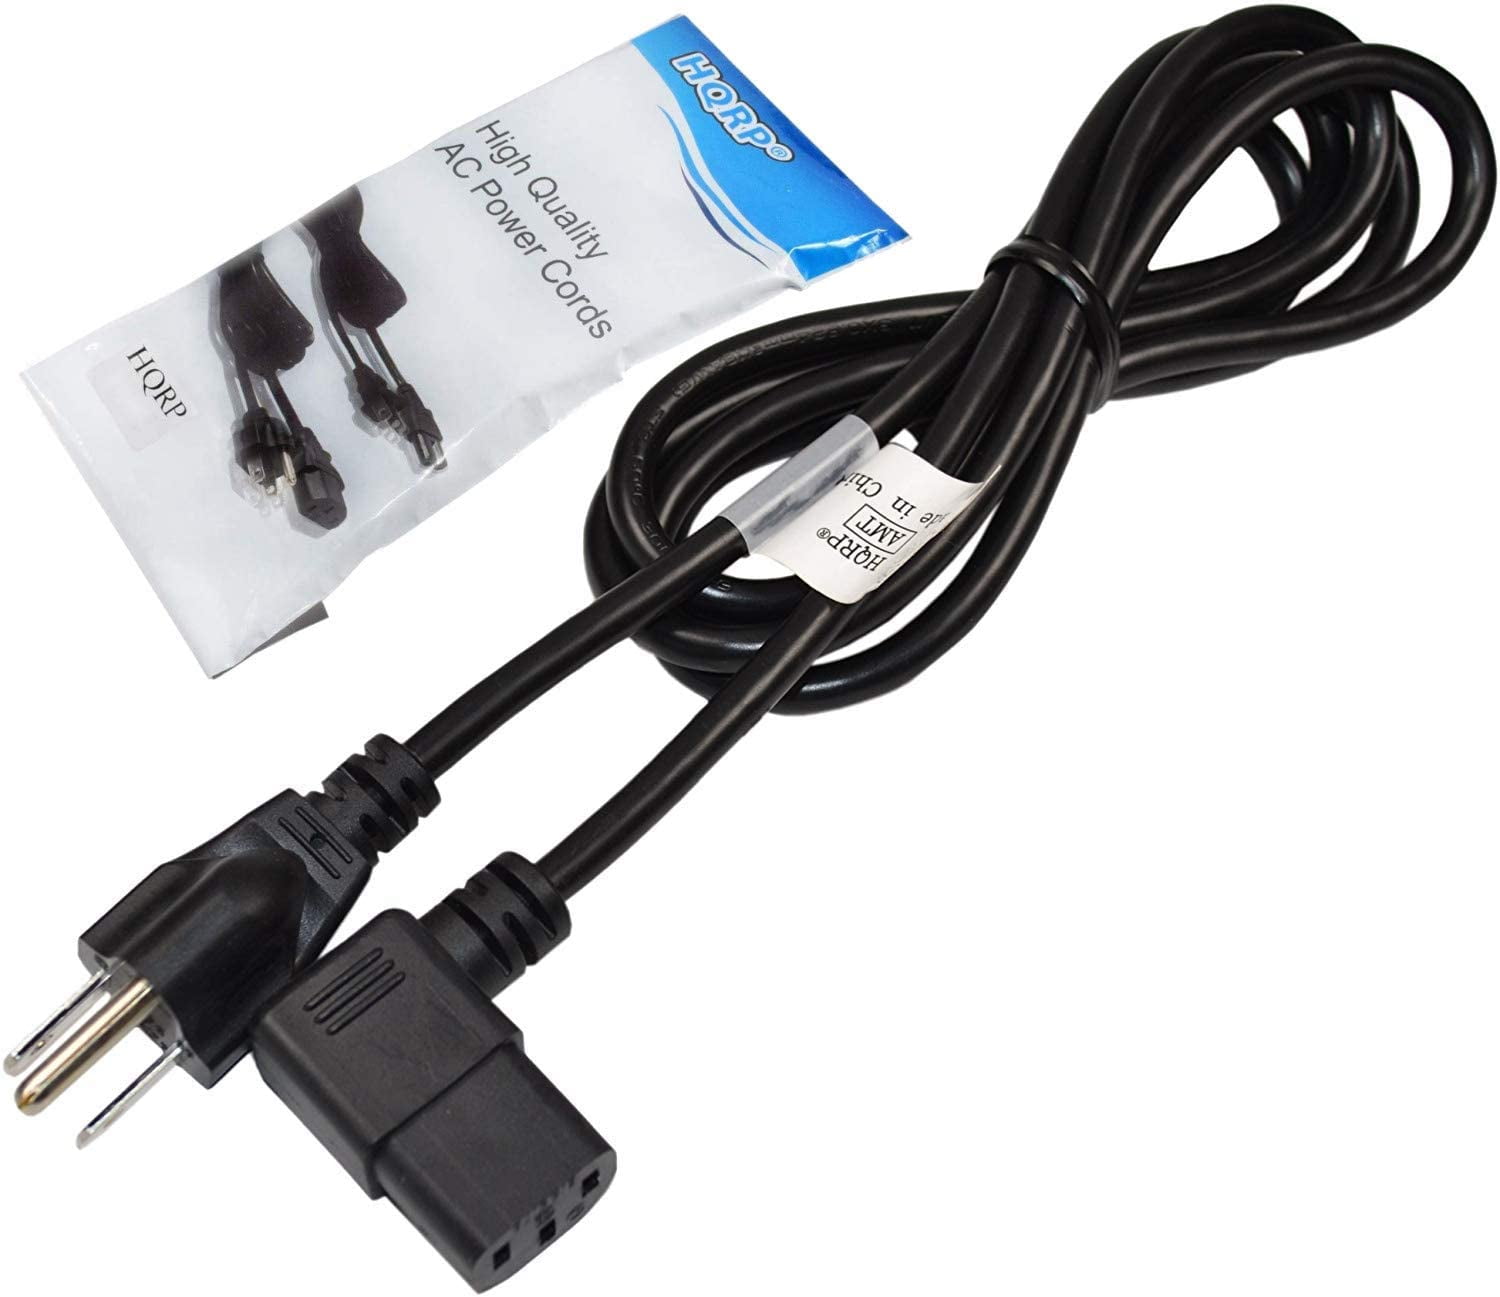 XR895 WE35 F85 F65 PWR+ 6 Ft AC Power Cord for Sole E060001 XE850 F63 F80 XE400 CT800 FT96 Treadmill Mains Cable 21016 F83 WE95 XU875 21034 CE800